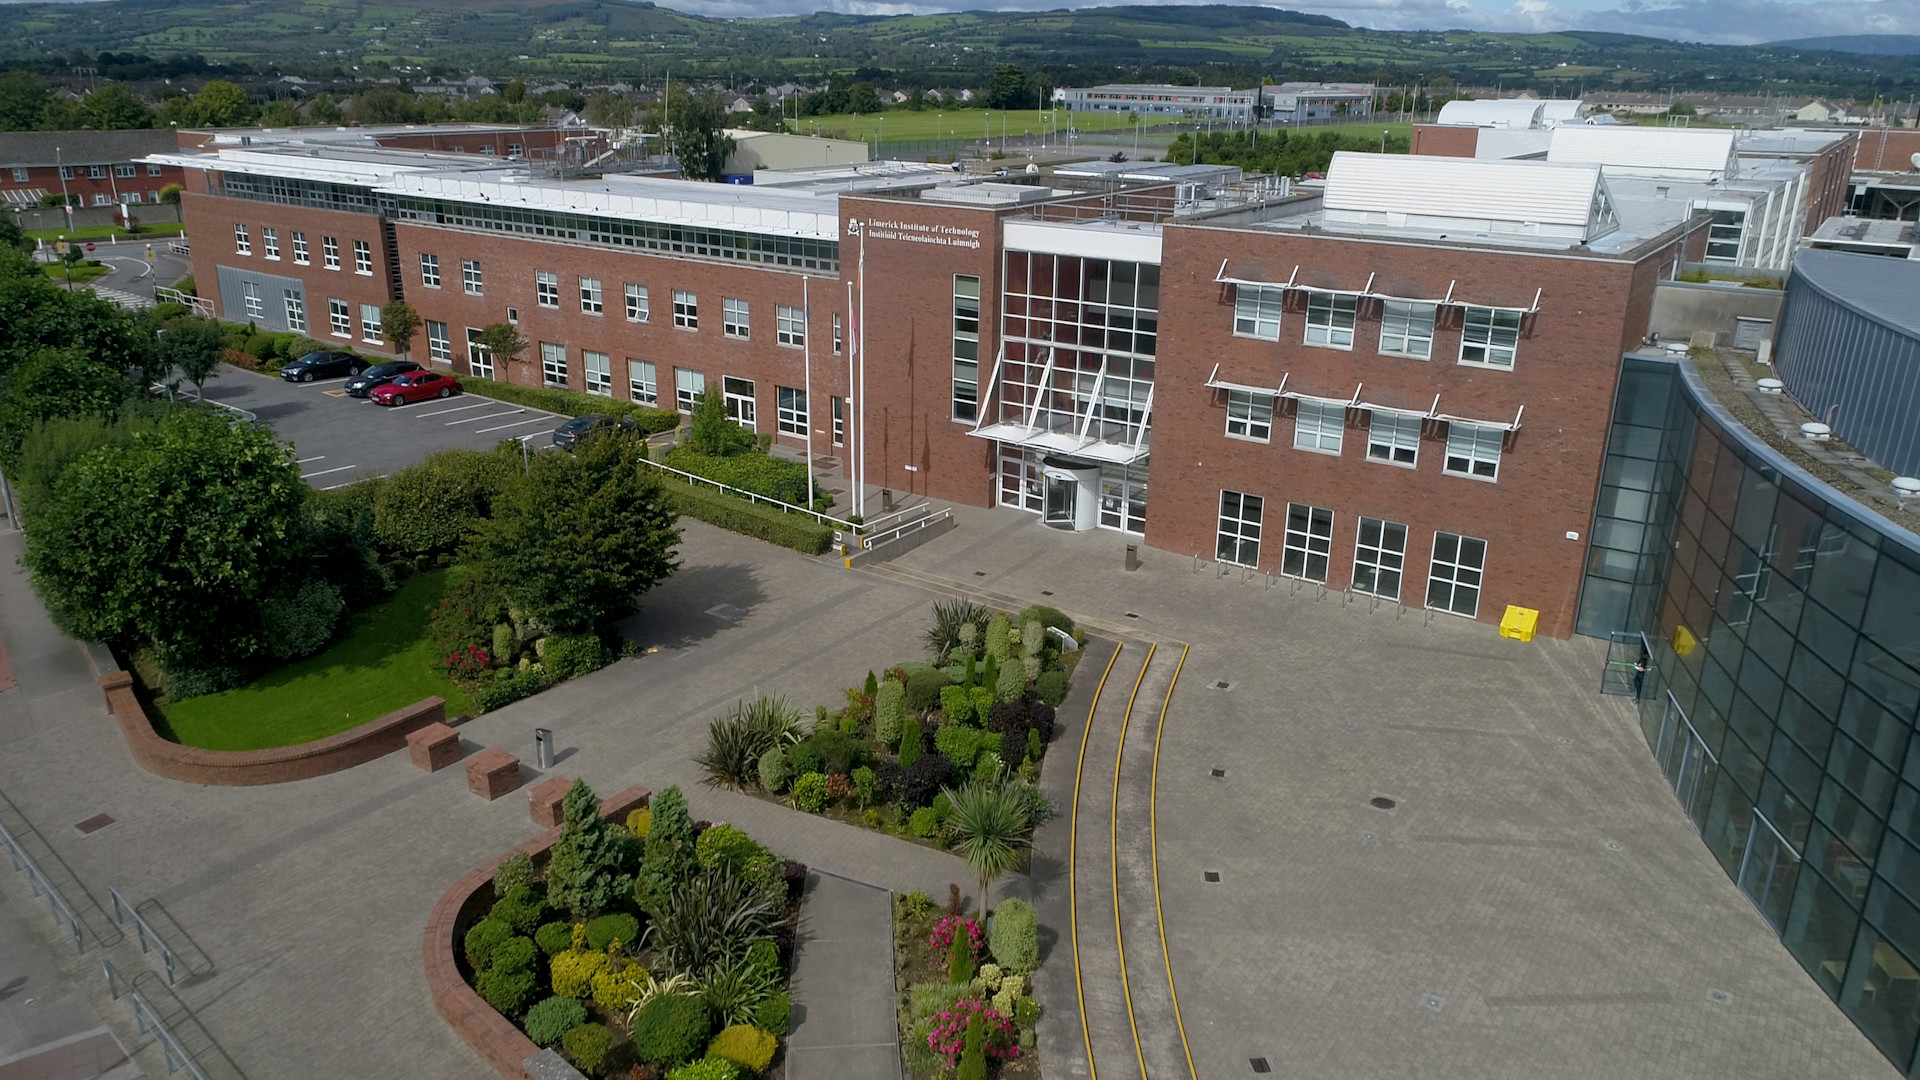 Pictured above is Limerick Institute of Technology (LIT), which will be welcoming back all students to campus this coming September.